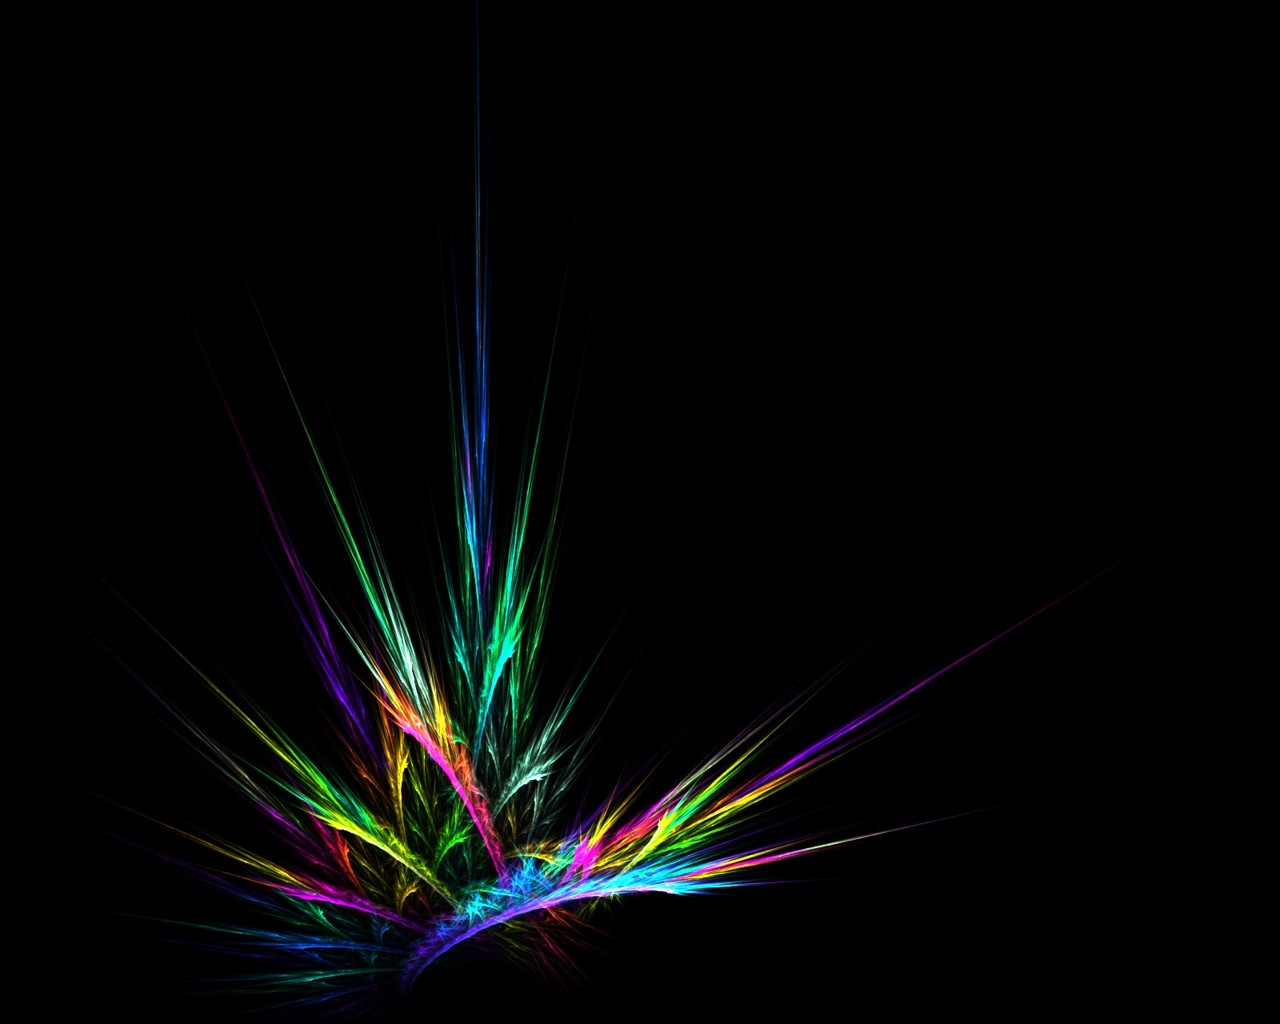 Black Abstract Wallpaper 2204 Hd Wallpapers in Abstract   Imagescicom 1280x1024